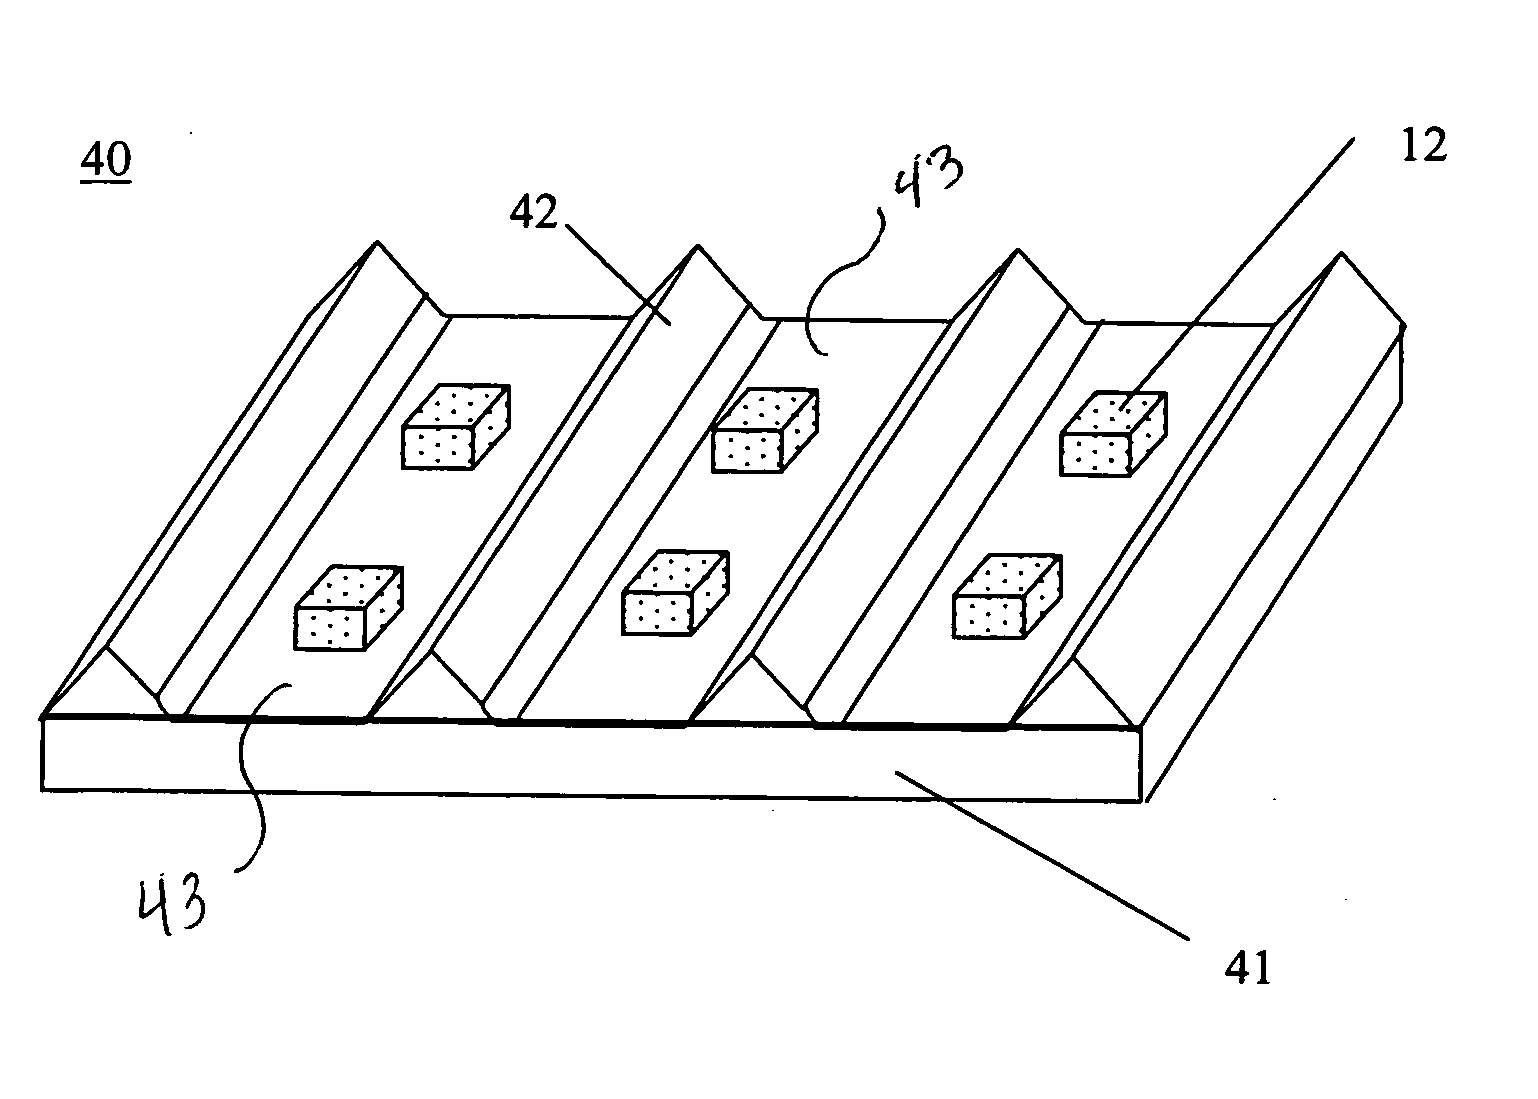 Light emitting diode arrays with improved light extraction